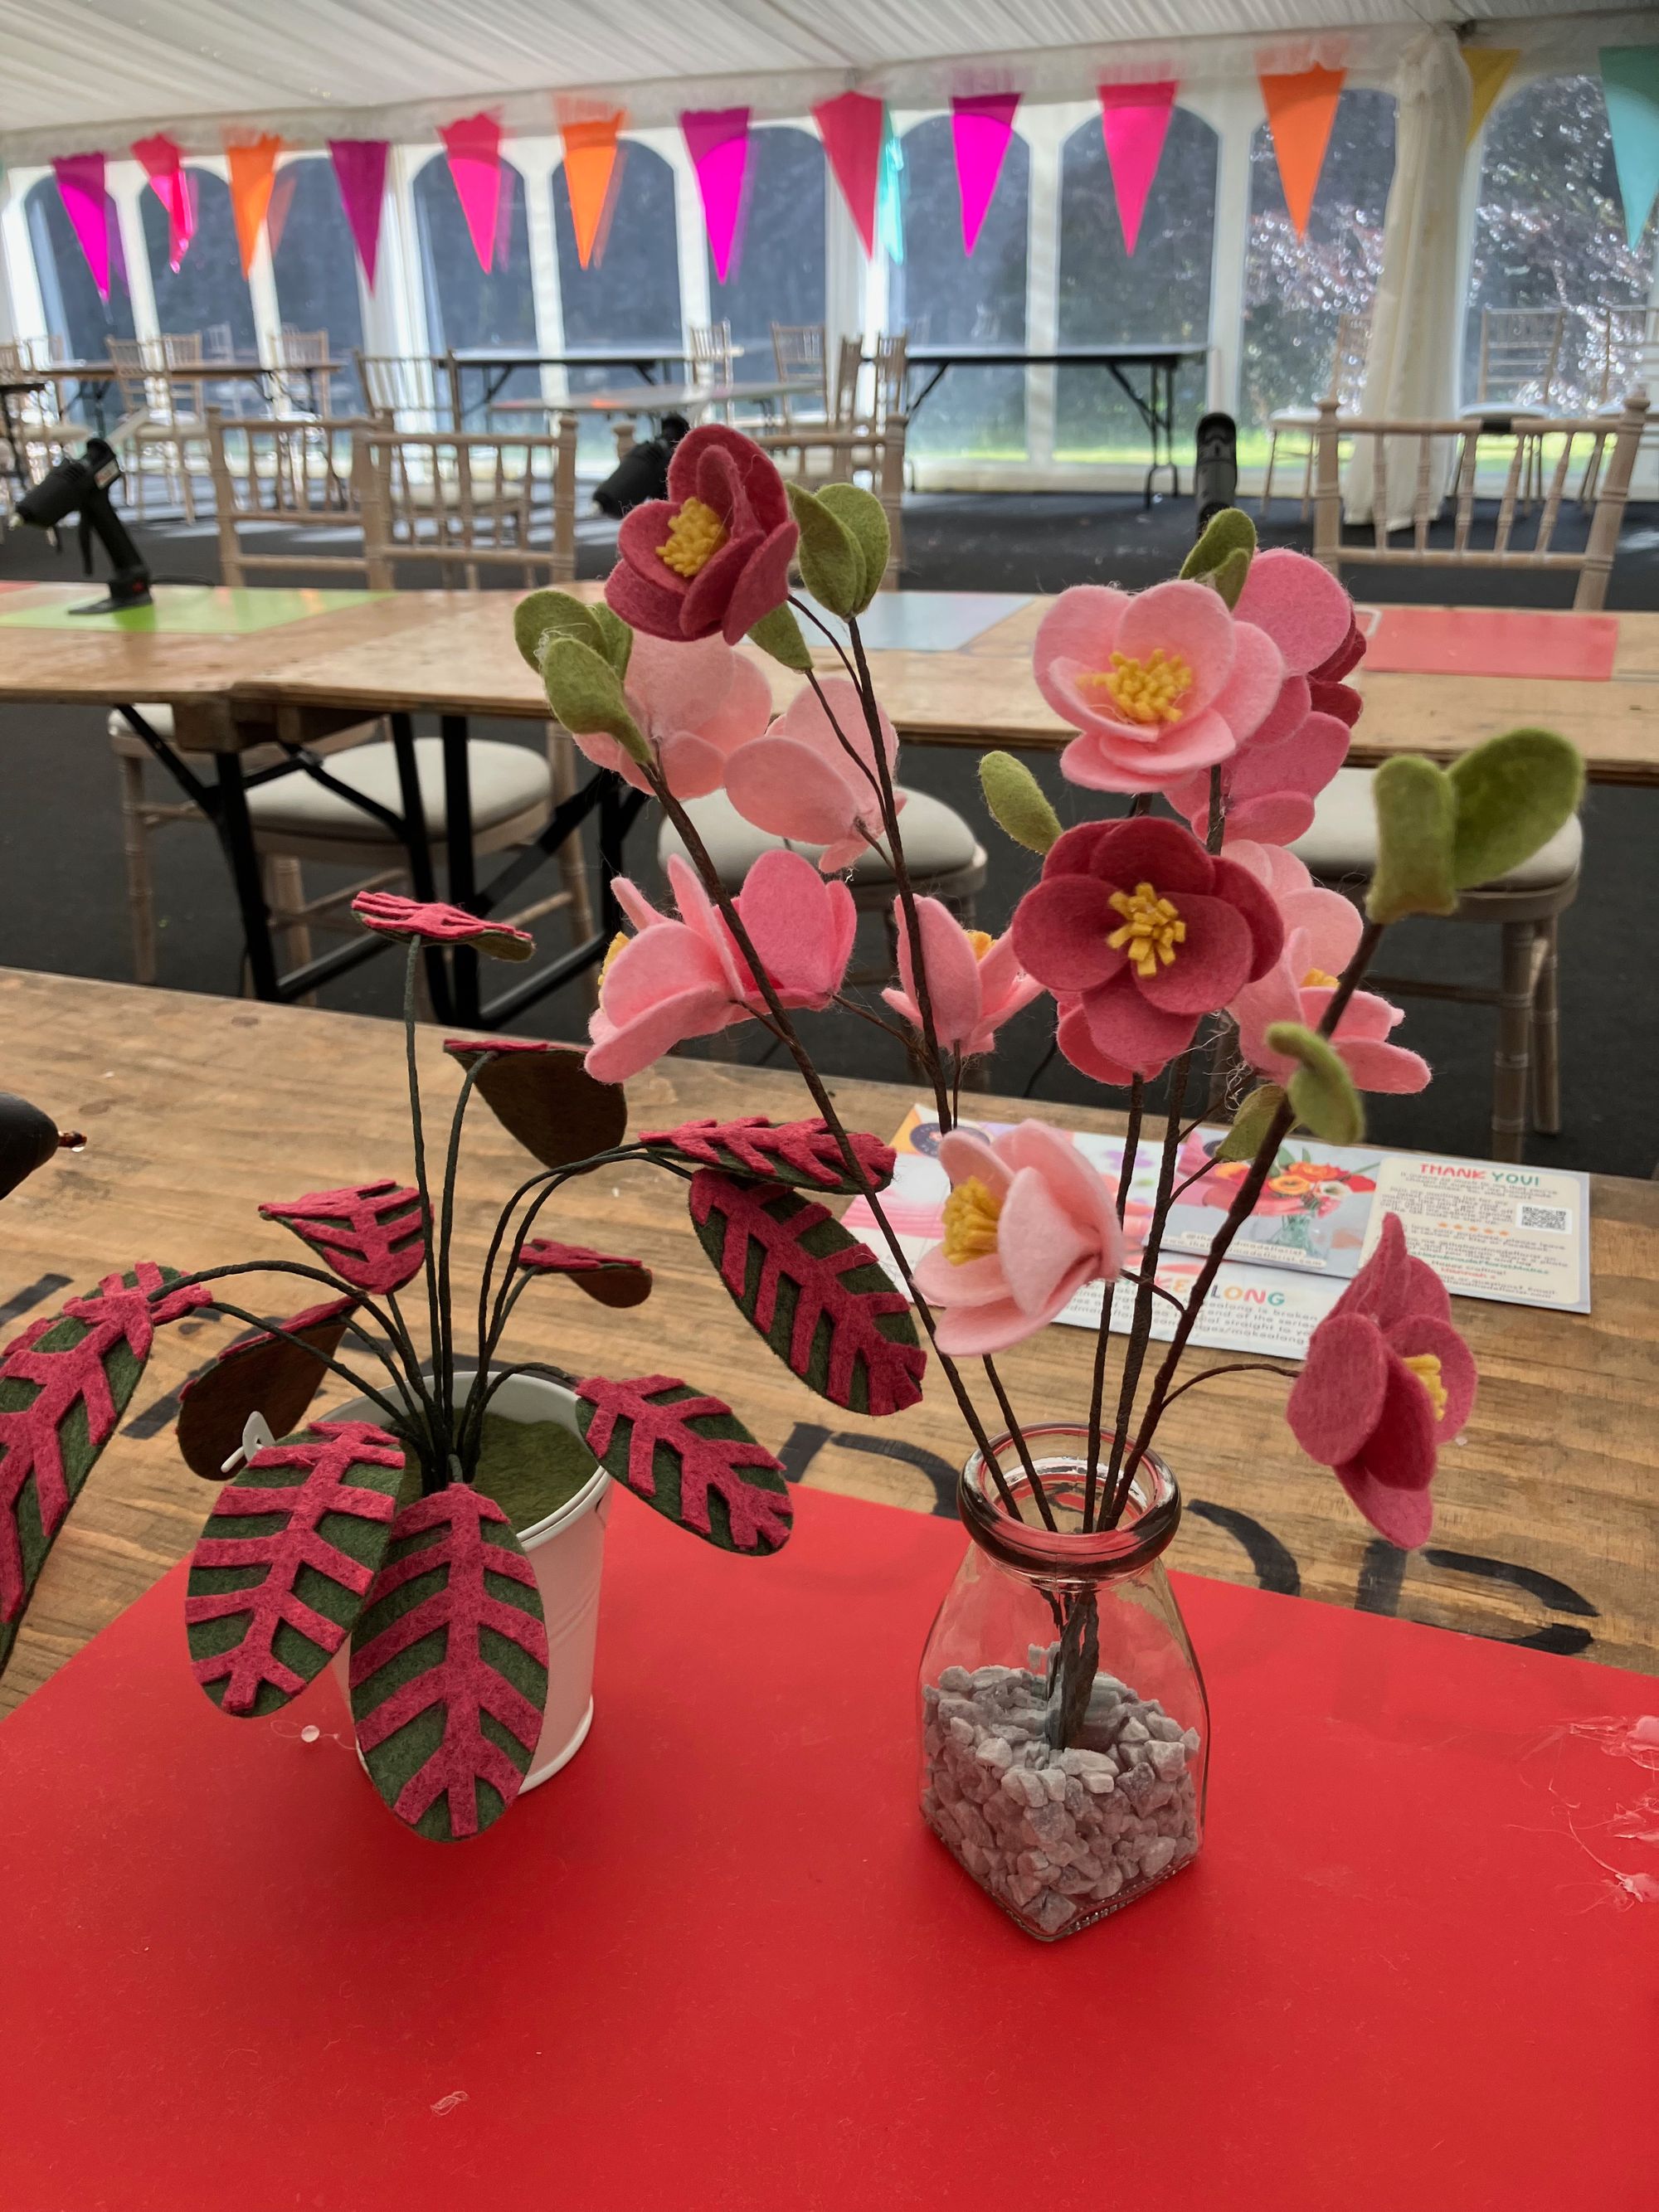 image of felt pink cherry blossoms in a vase and a pink and green felt plant, on a red safety mat on a table in a marquee with pink bunting.